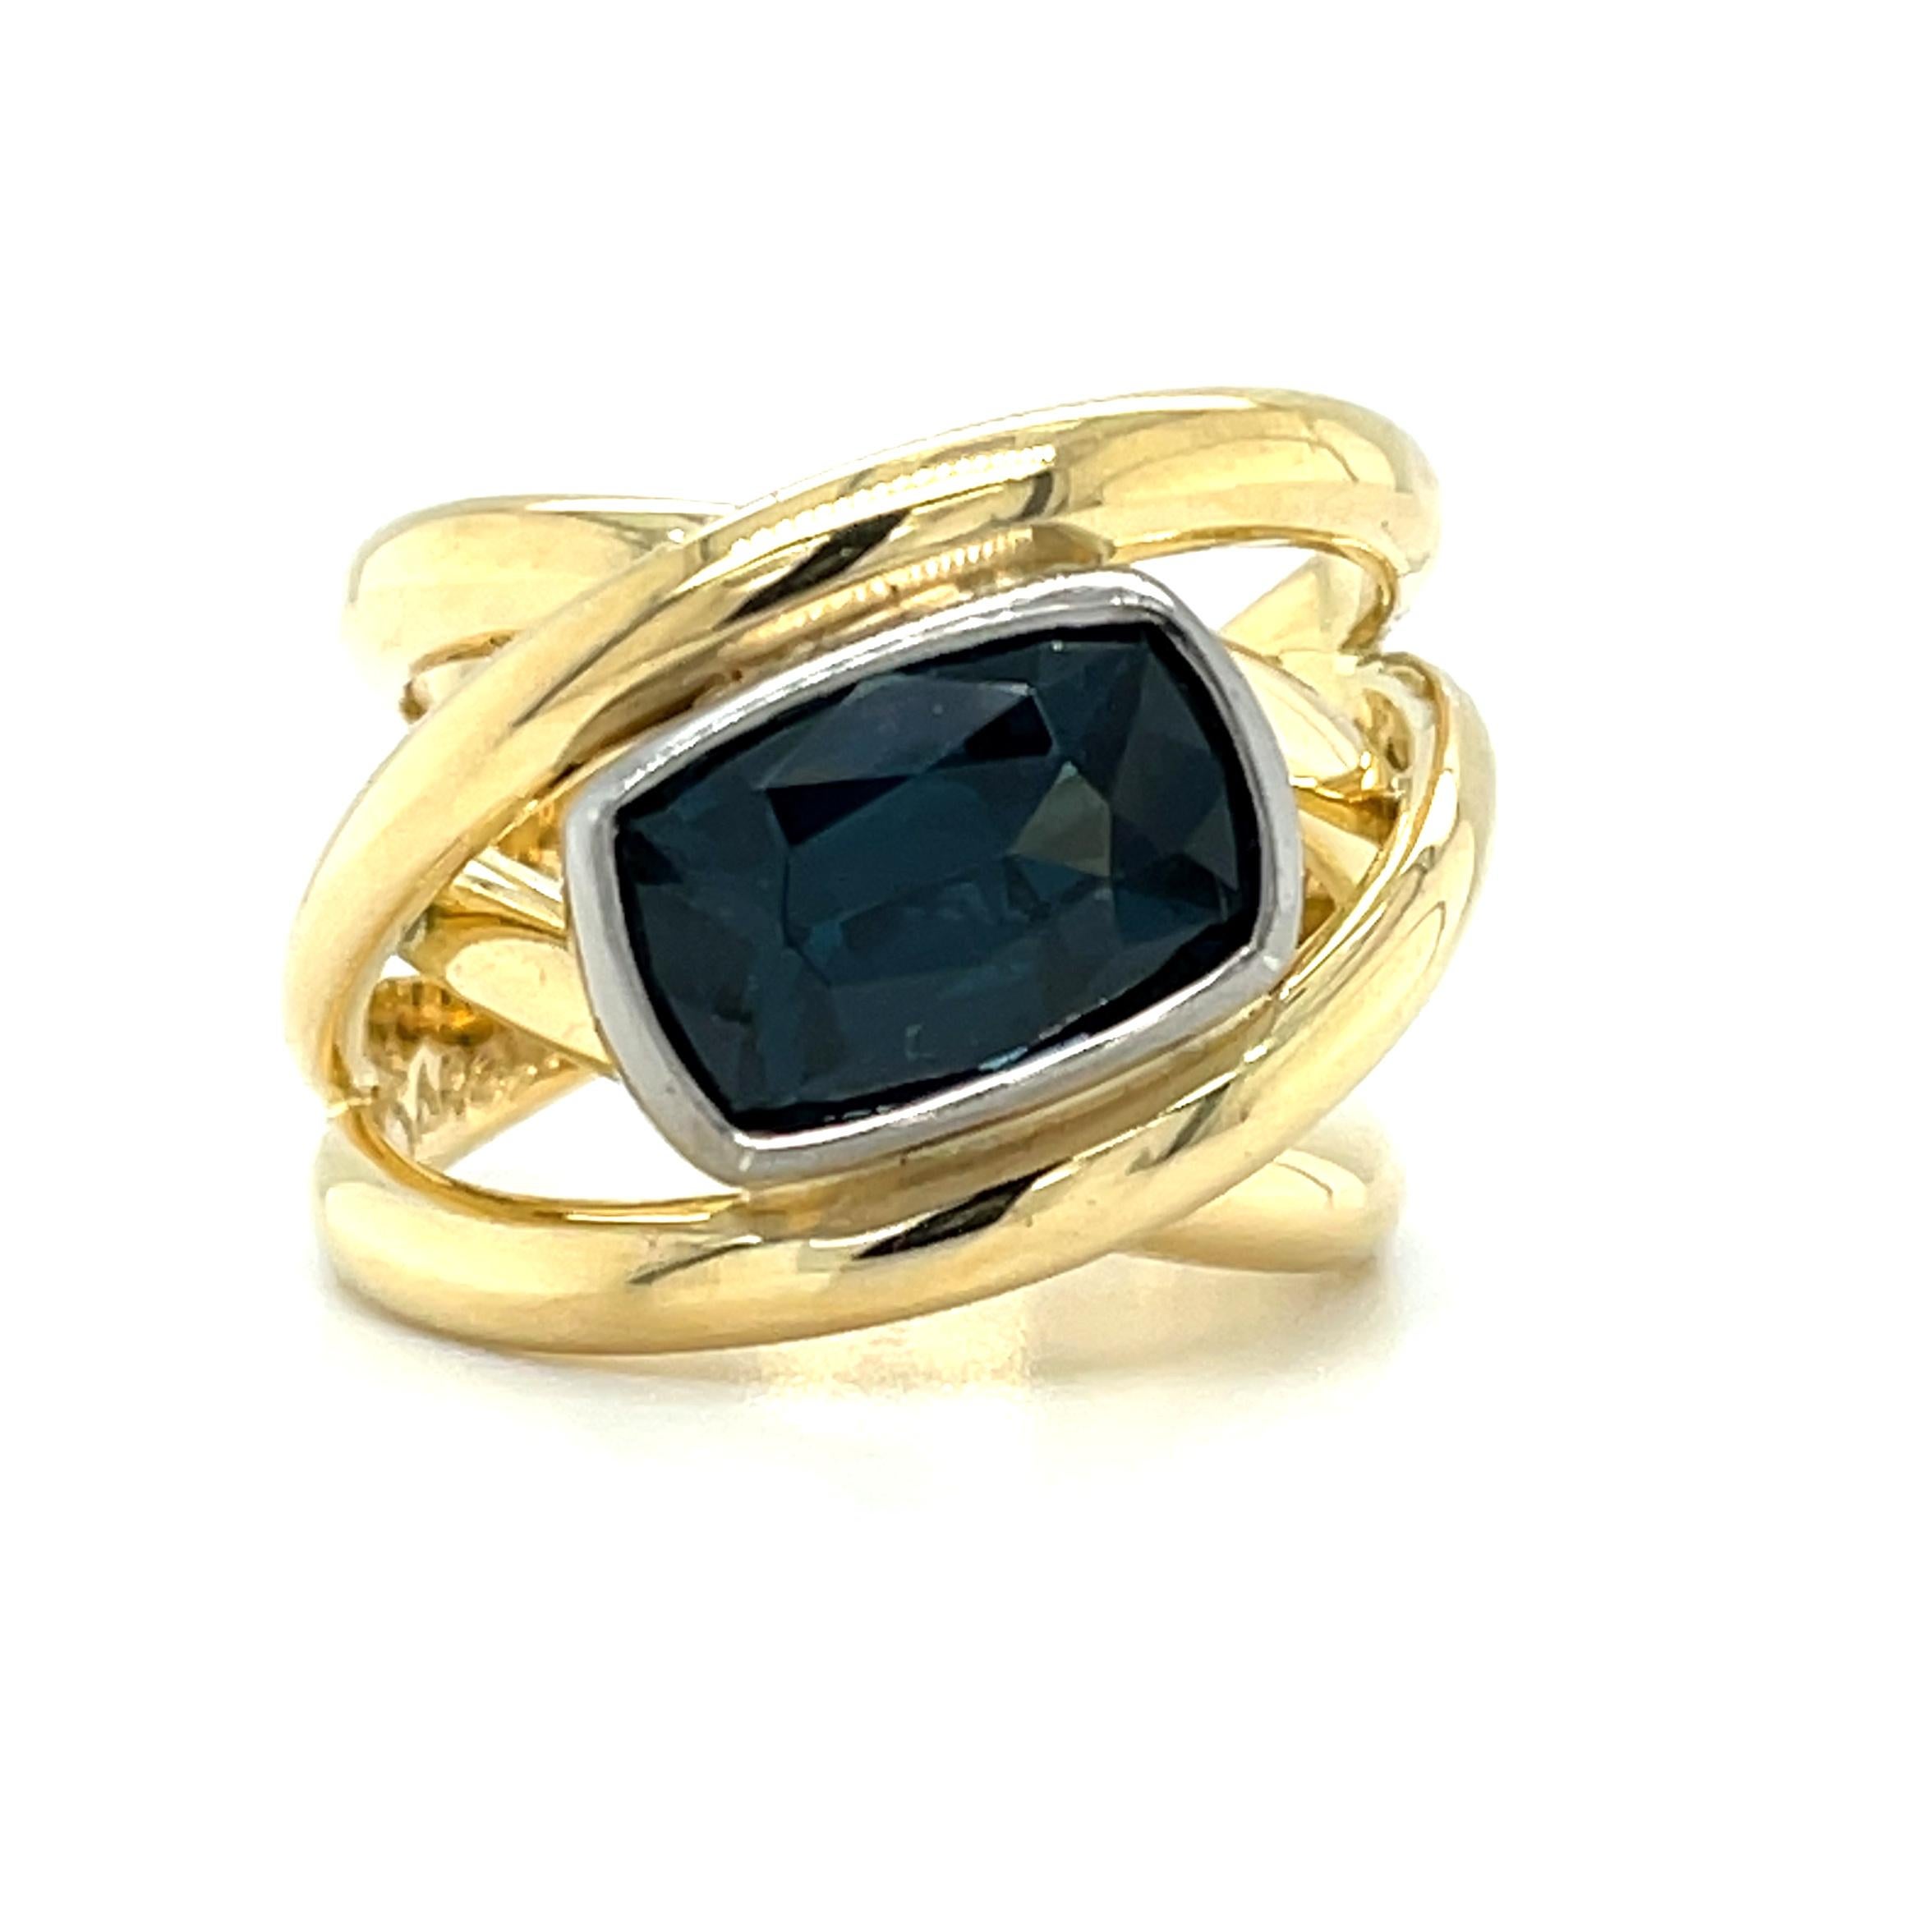 This striking band ring features a 4.07 carat cushion-shaped blue spinel with beautiful rich, navy blue color! The lovely gem is set on a horizontal diagonal, in an 18k white gold bezel. High-polished 18k yellow gold bands swirl around the center